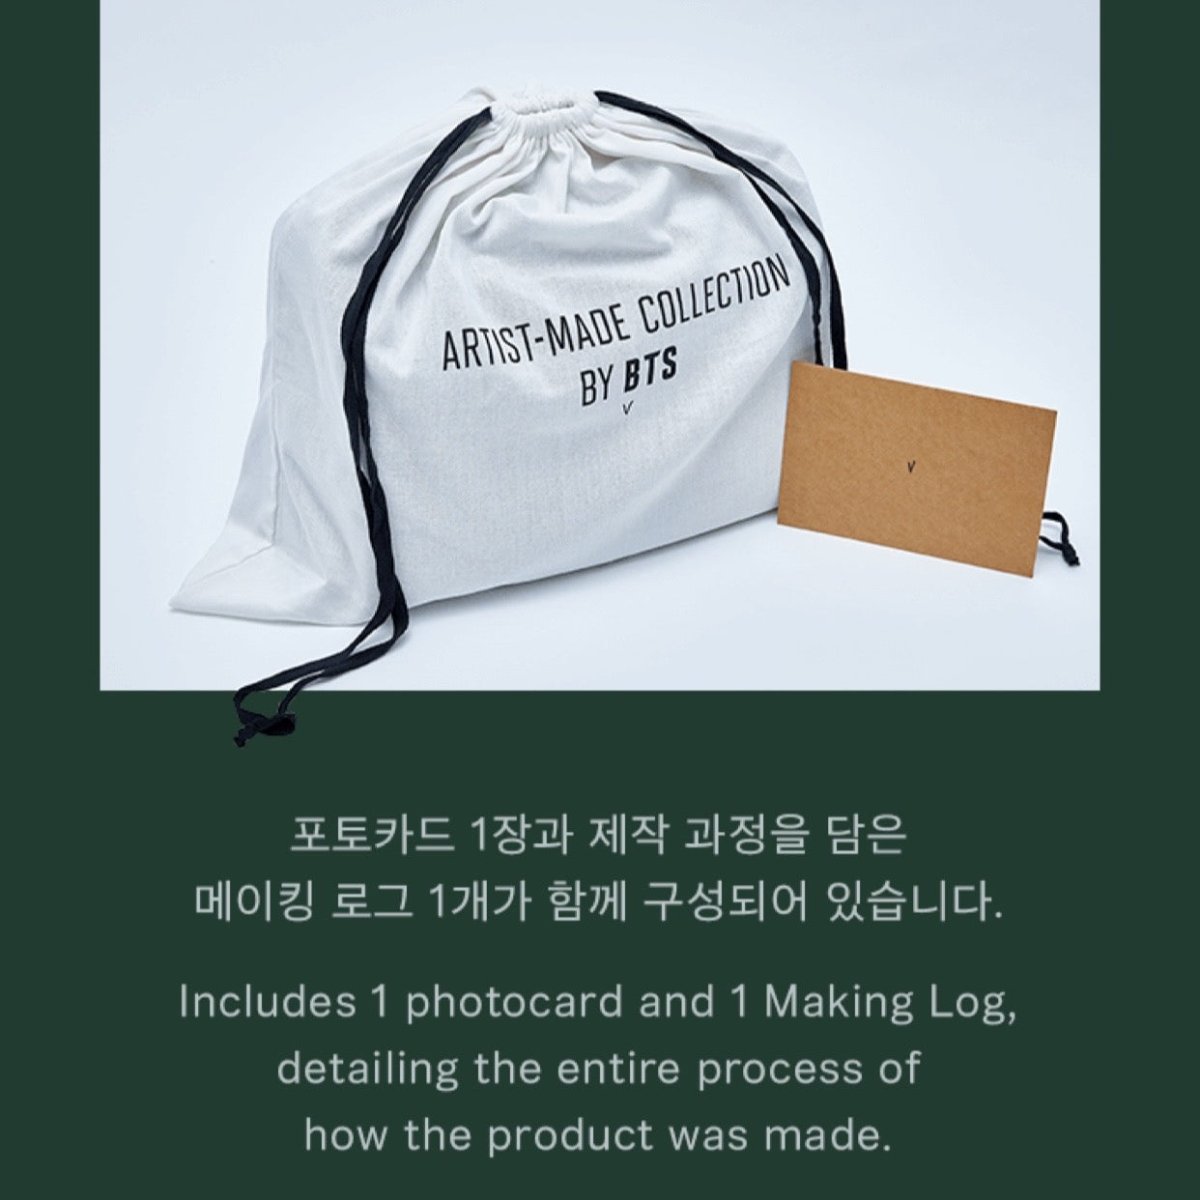 BTS Artist Made Collection V Taehyung Mute Boston Bag ship from